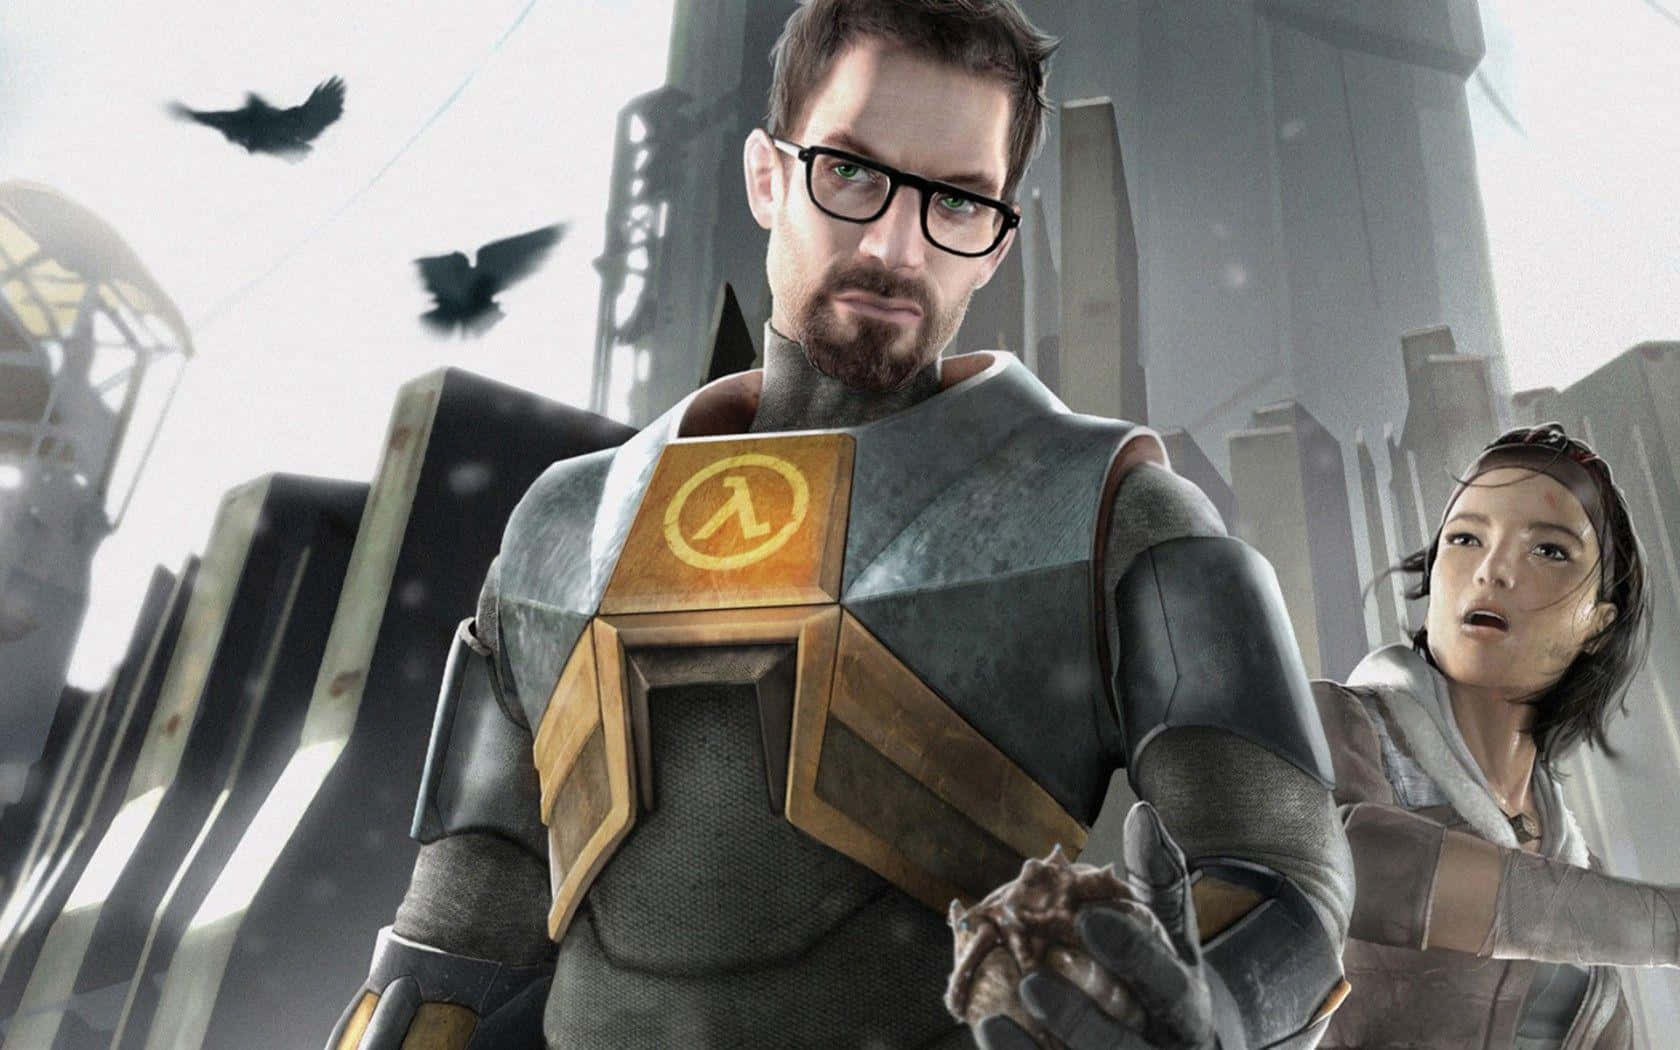 Ground-breaking action in the dystopian world of Half Life 2 Wallpaper